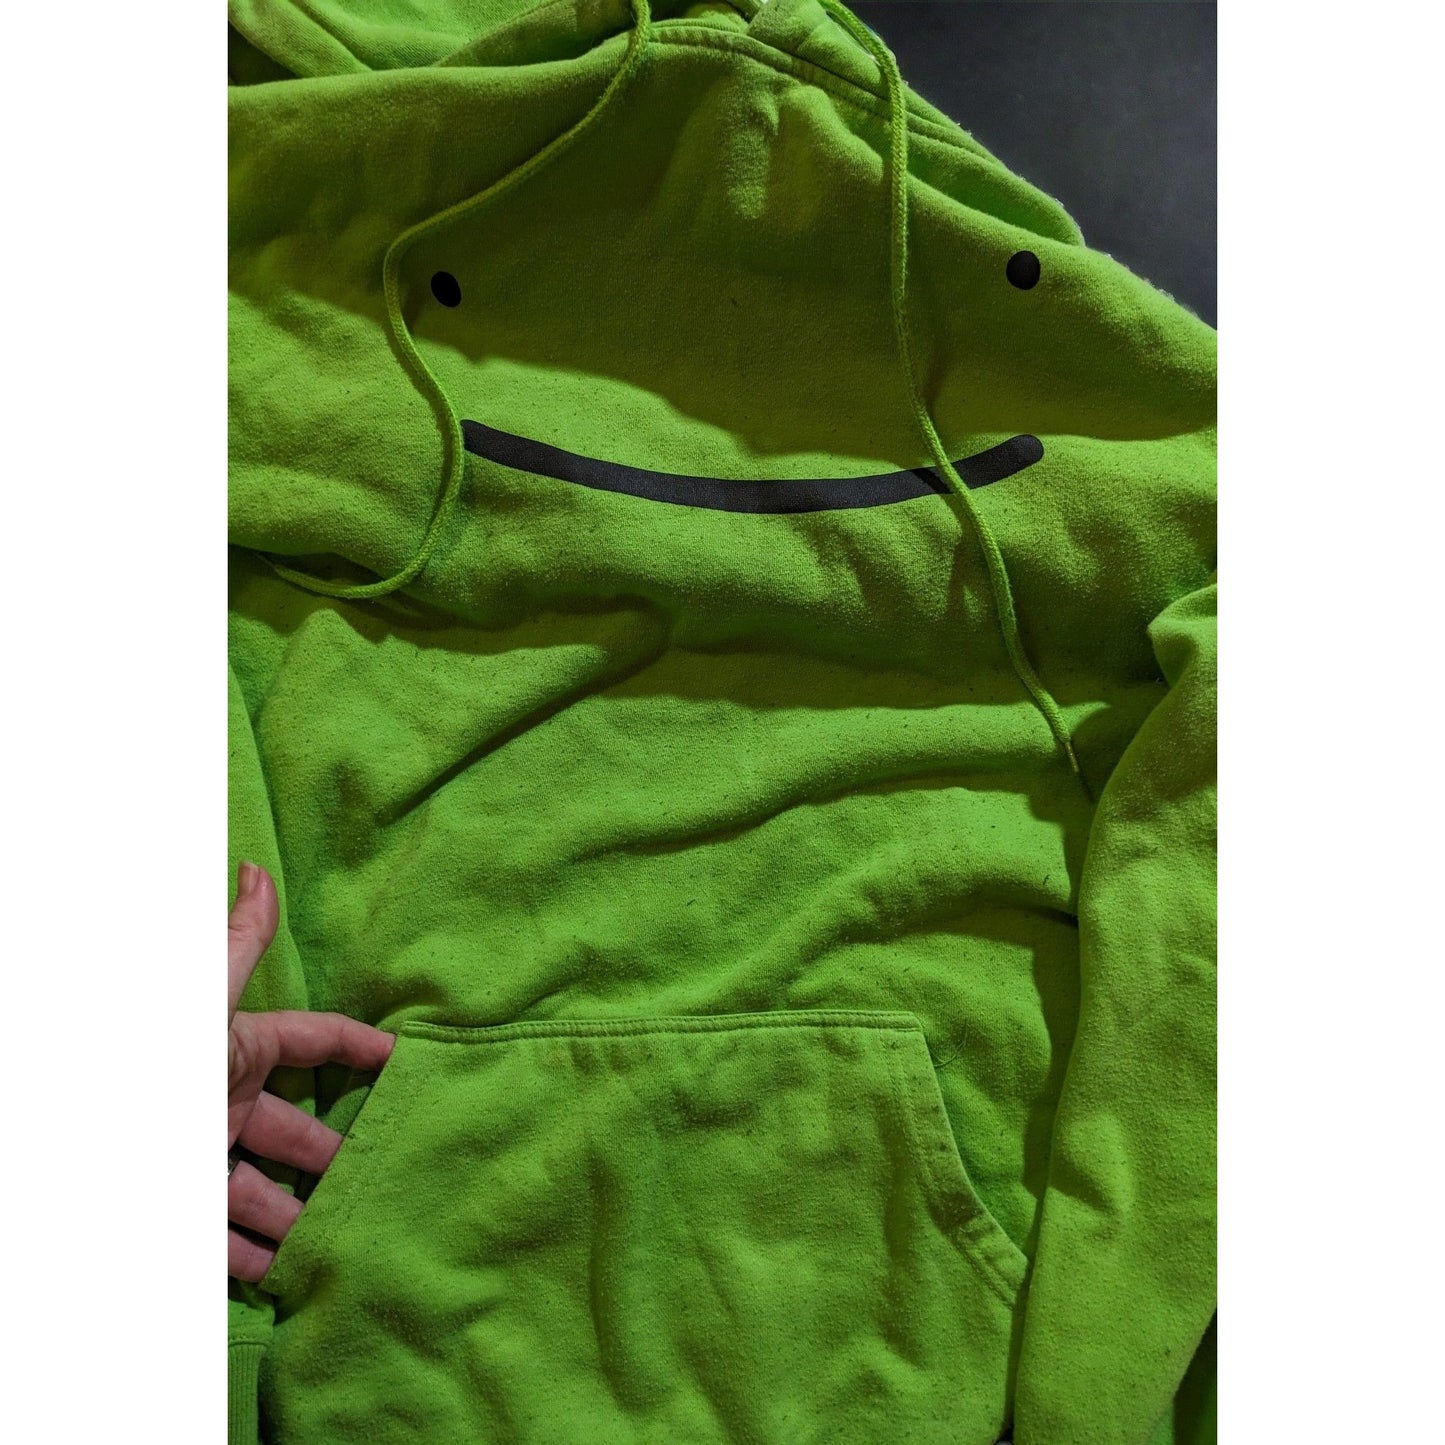 Dream SMP Green Smile Hoodie